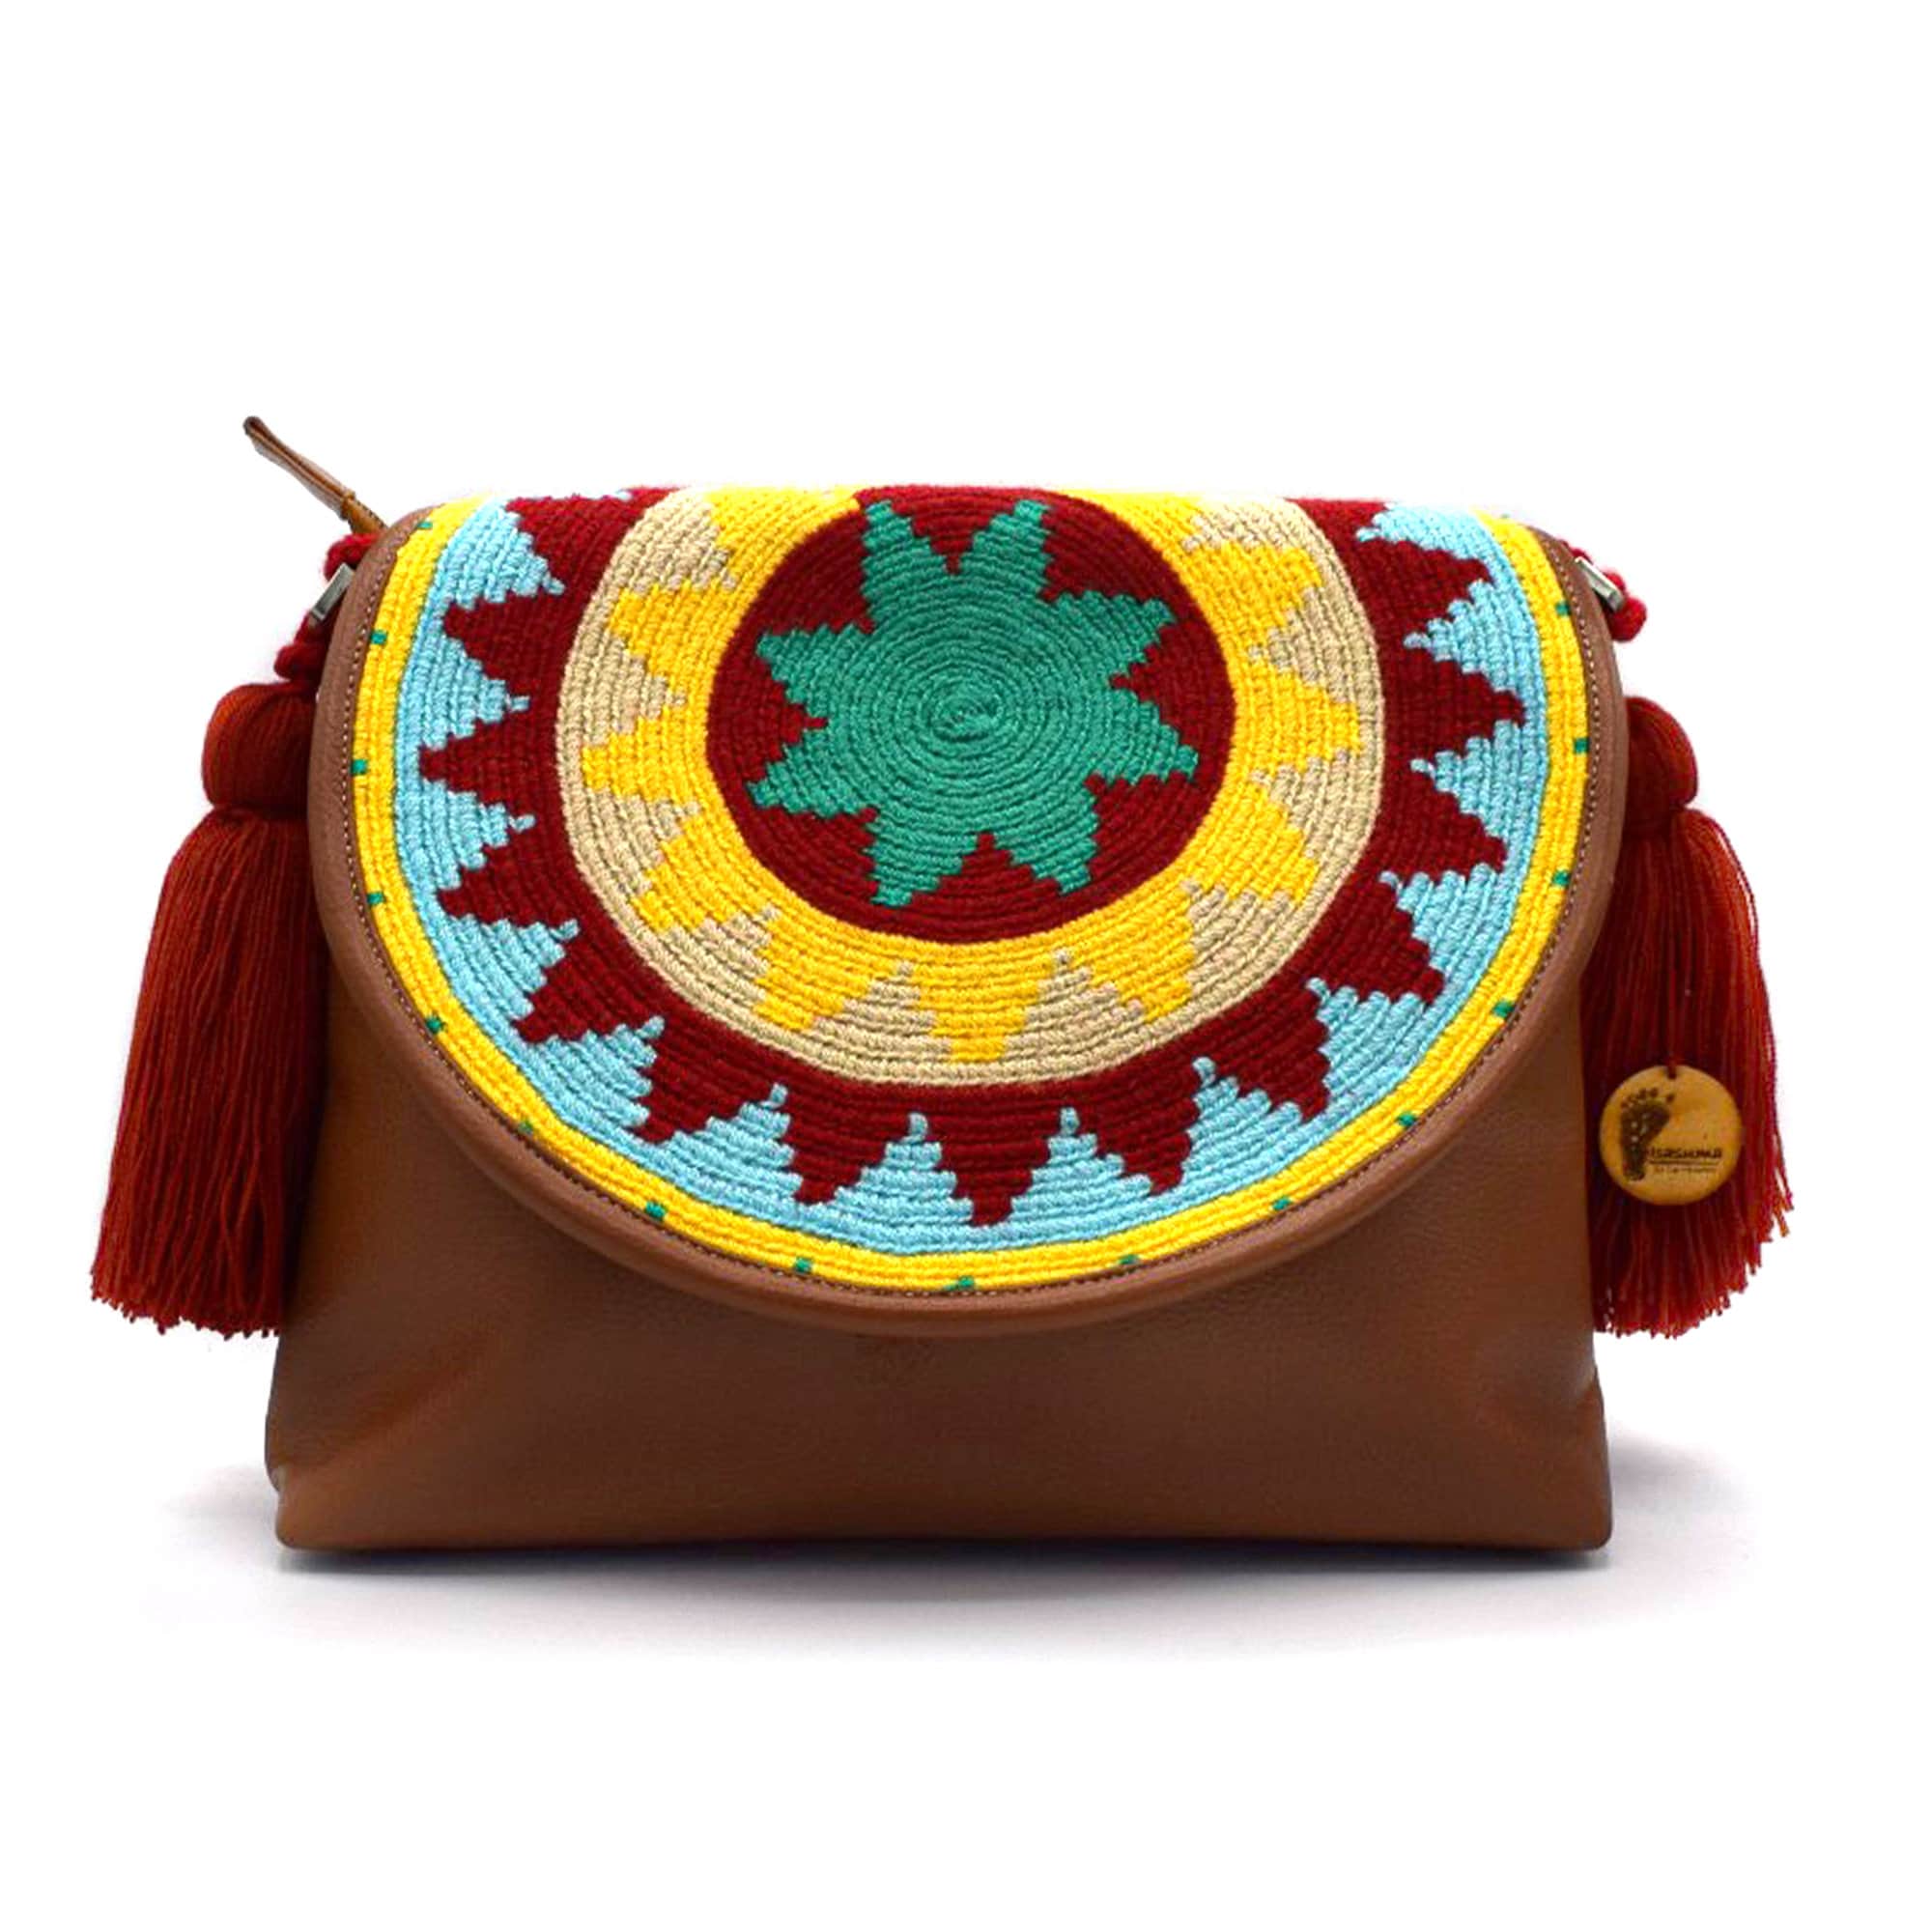 Authentic Leather Purse with Wayuu Flap | Handmade in Colombia